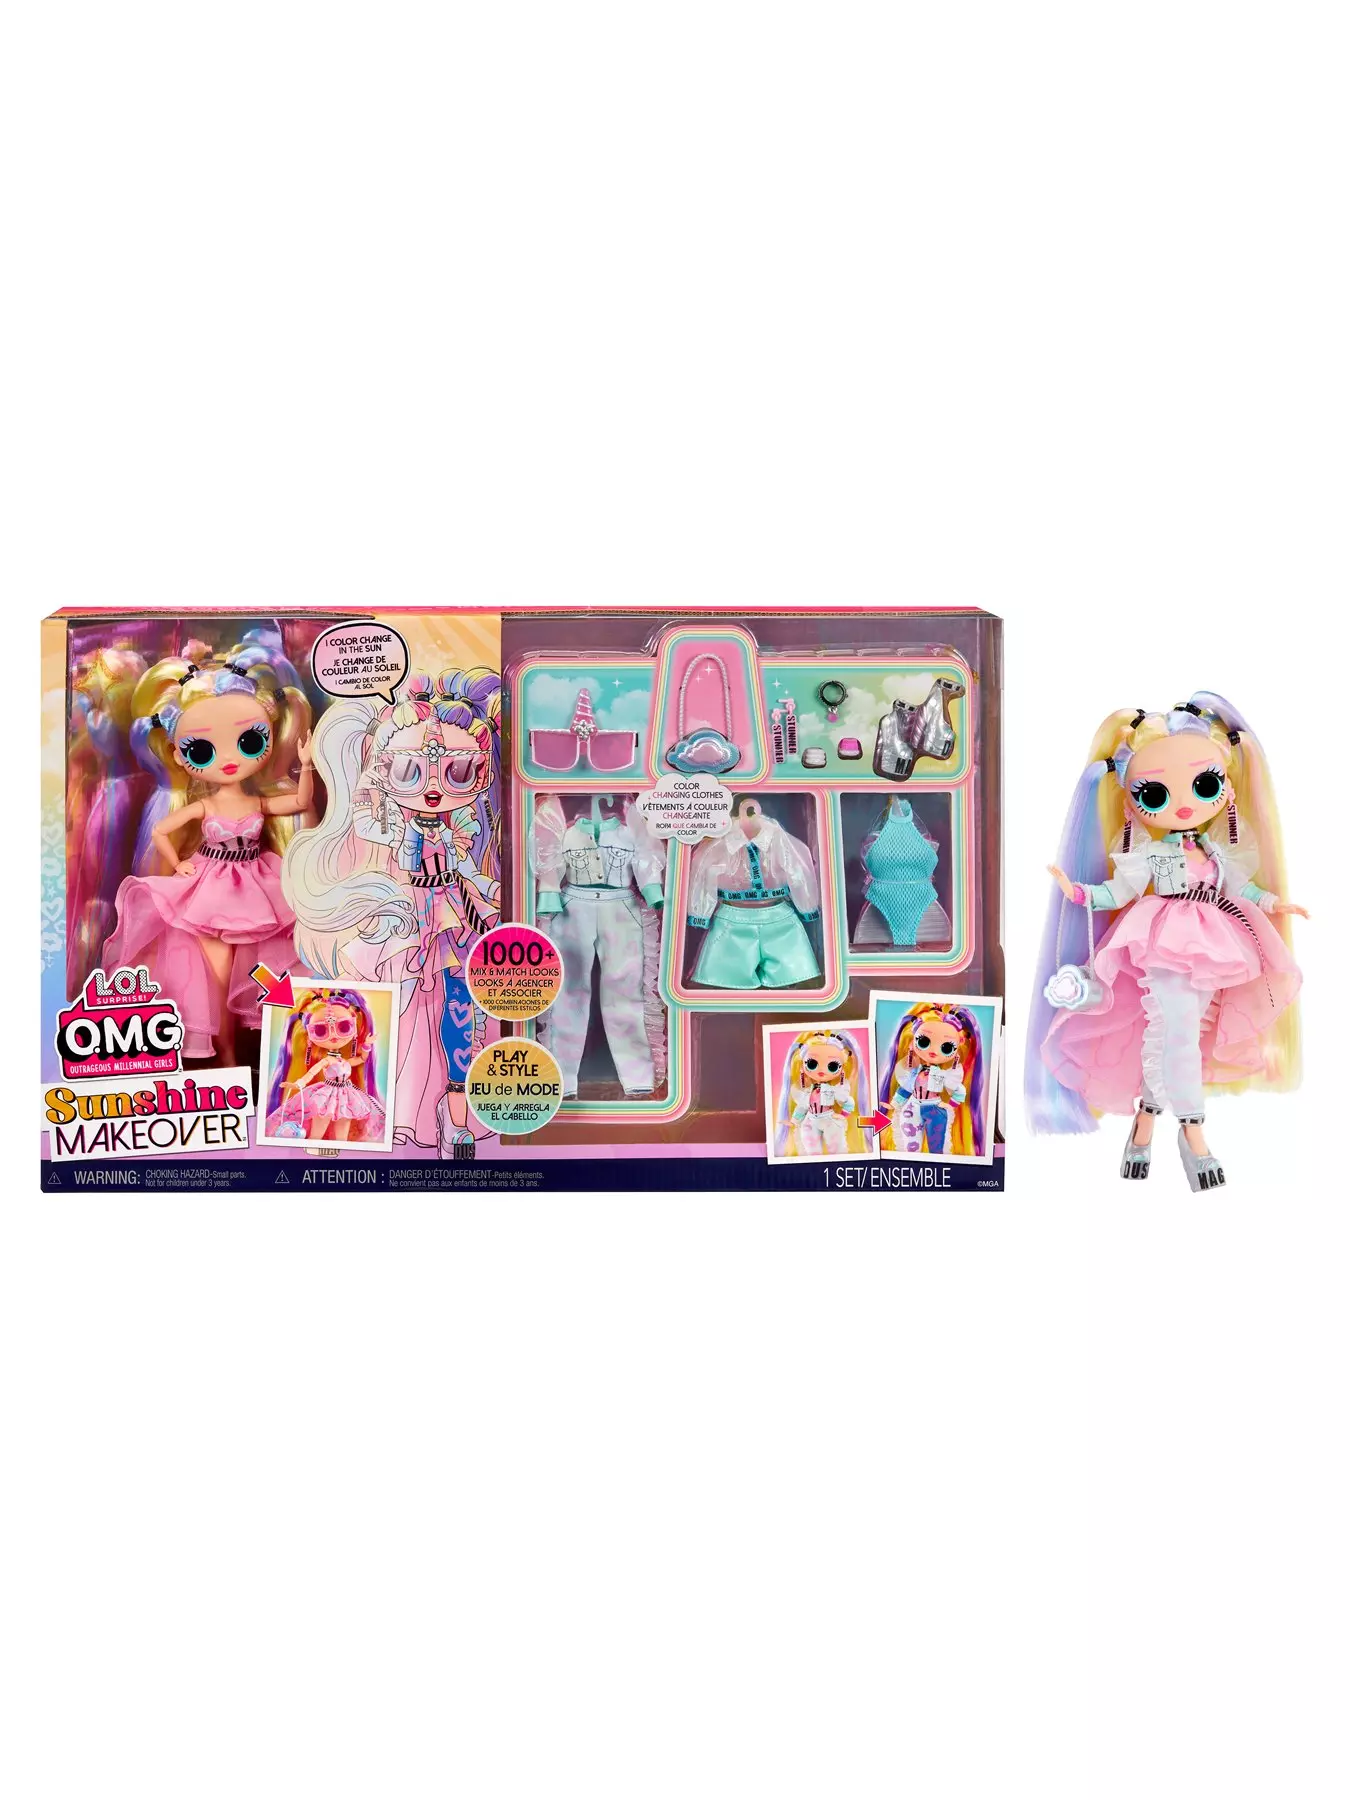  L.O.L. Surprise Tweens Babysitting Sleepover Party (2 Dolls)  with 20 Surprises- 1 Fashion Doll & 1 Collectible Doll, Holiday Toy  Playset, Great Gift for Kids Ages 4 : Toys & Games